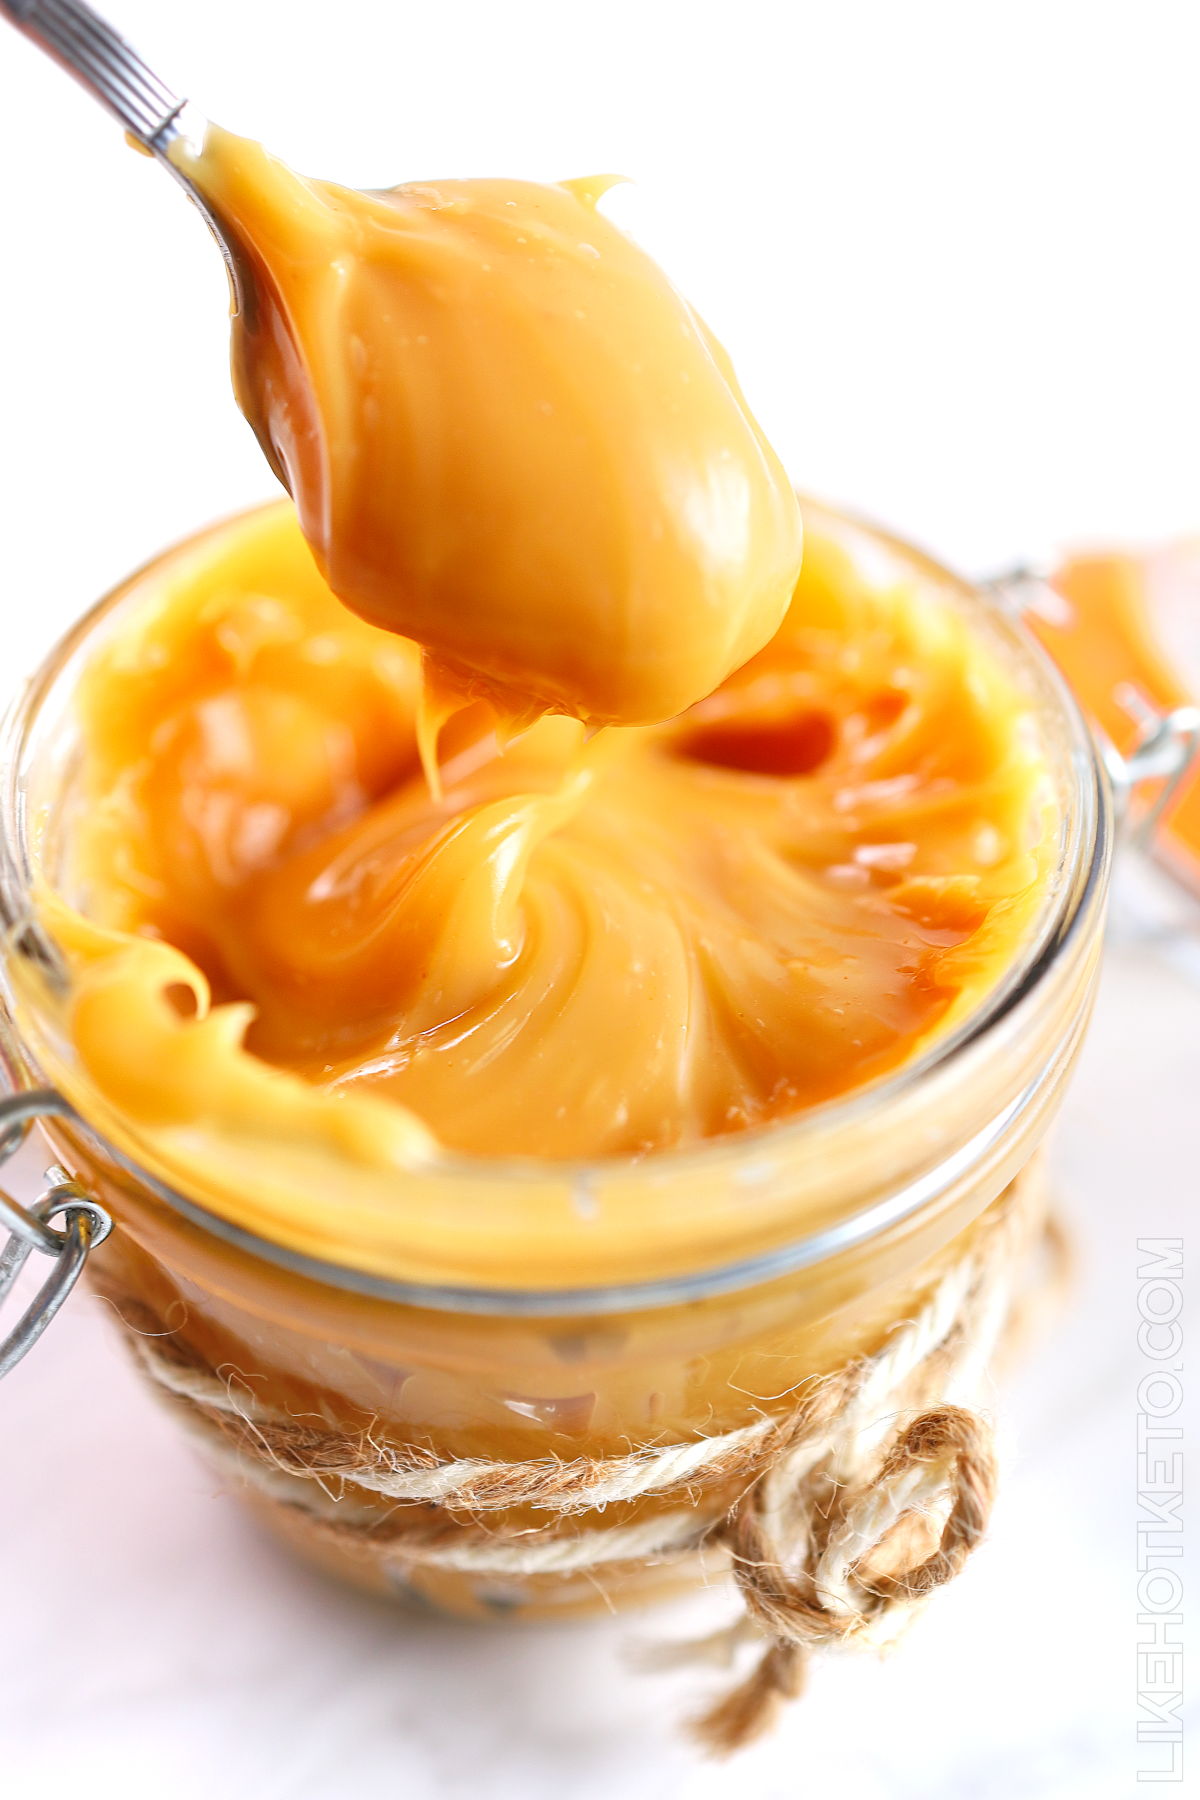 A spoonful of keto dulce de leche caramel, lifted from mason jar tied up with decorative cord.